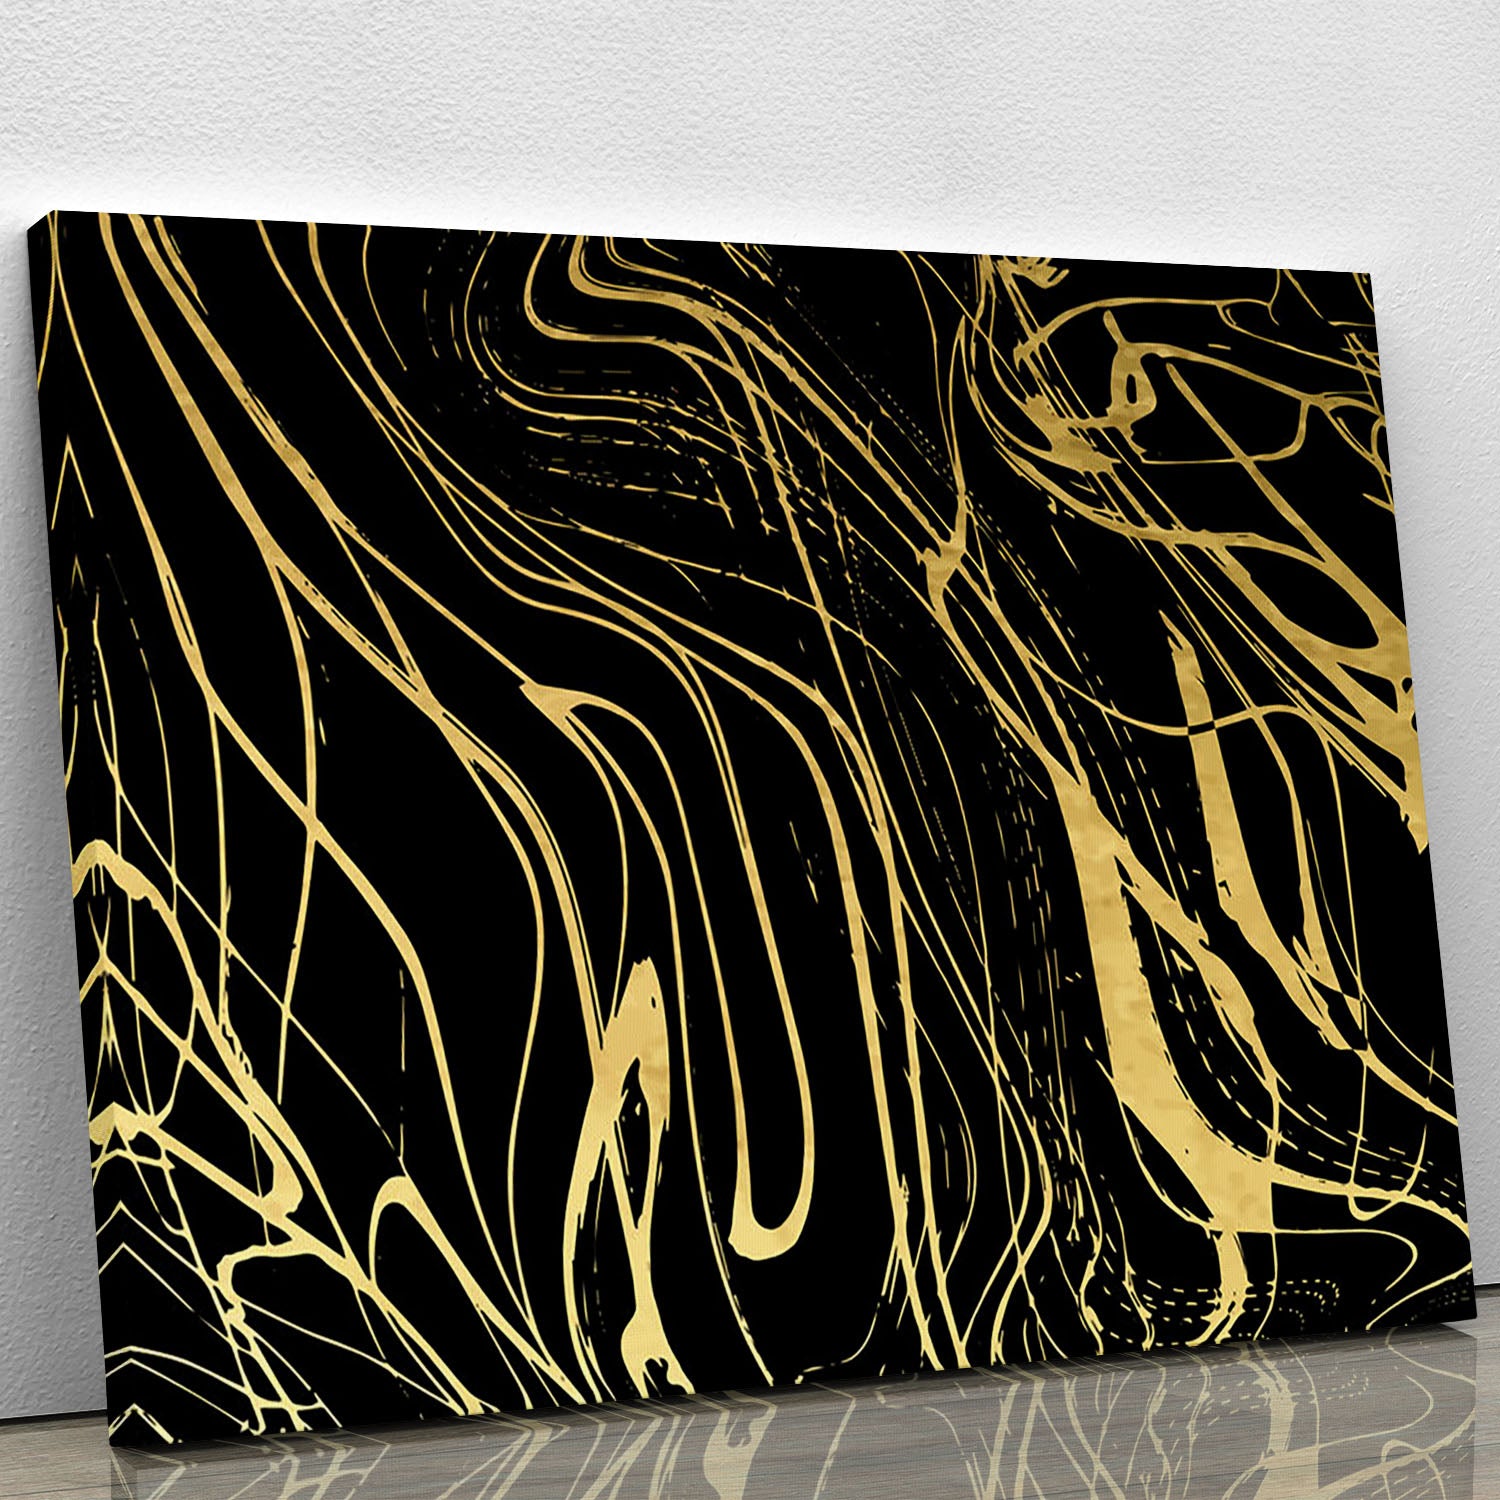 Black and Gold Swirled Abstract Canvas Print or Poster - Canvas Art Rocks - 1